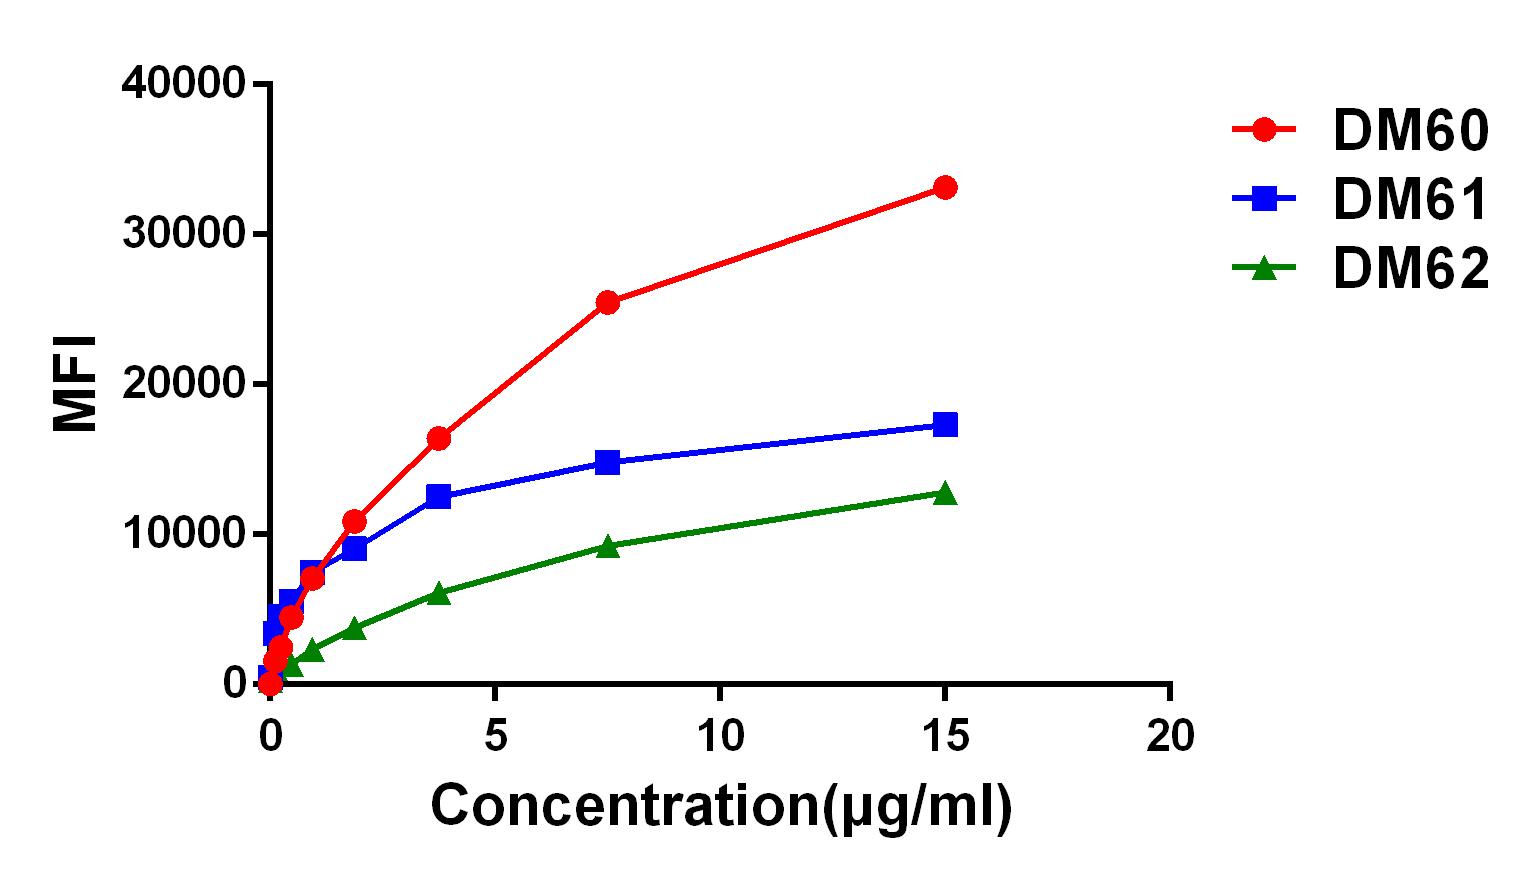 Figure 4. Affinity ranking of different Rabbit anti- GPRC5D mAb clones by titration of different concentration onto H929 cells. The Y-axis represents the mean fluorescence intensity (MFI) while the X-axis represents the concentration of IgG used.